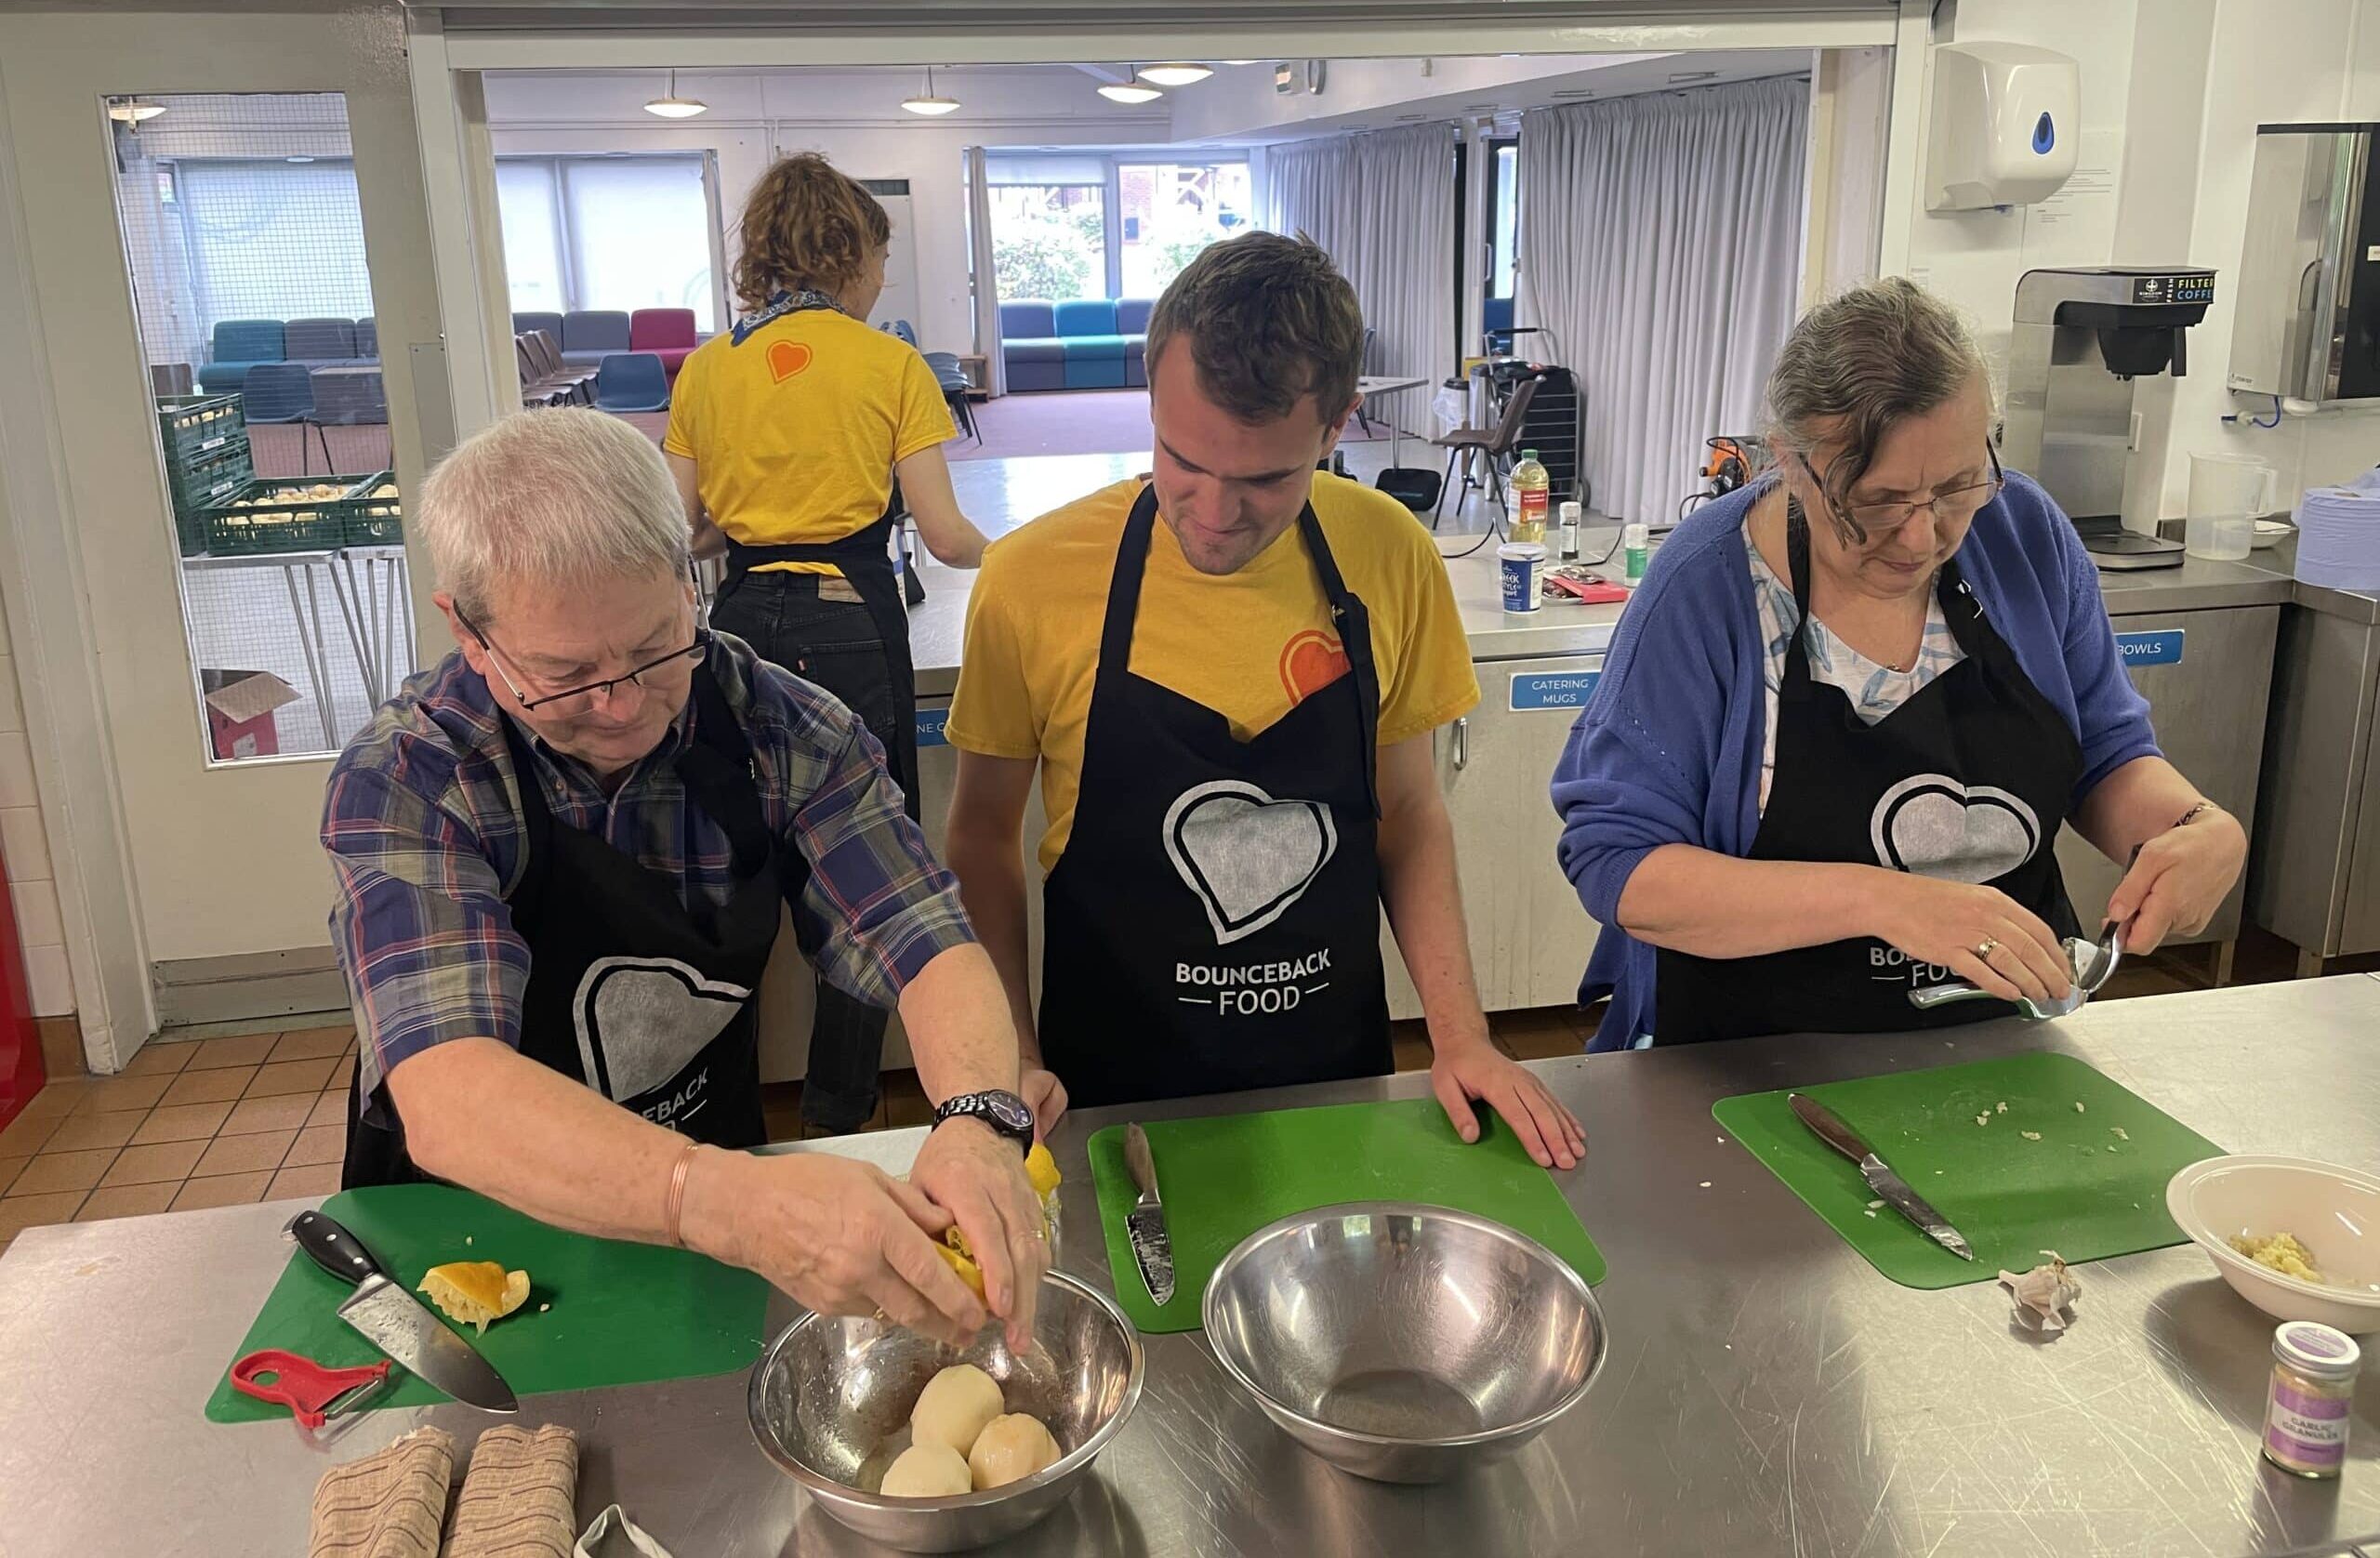 A group of people taking part in a Bounceback Food cookery workshop in a community kitchen